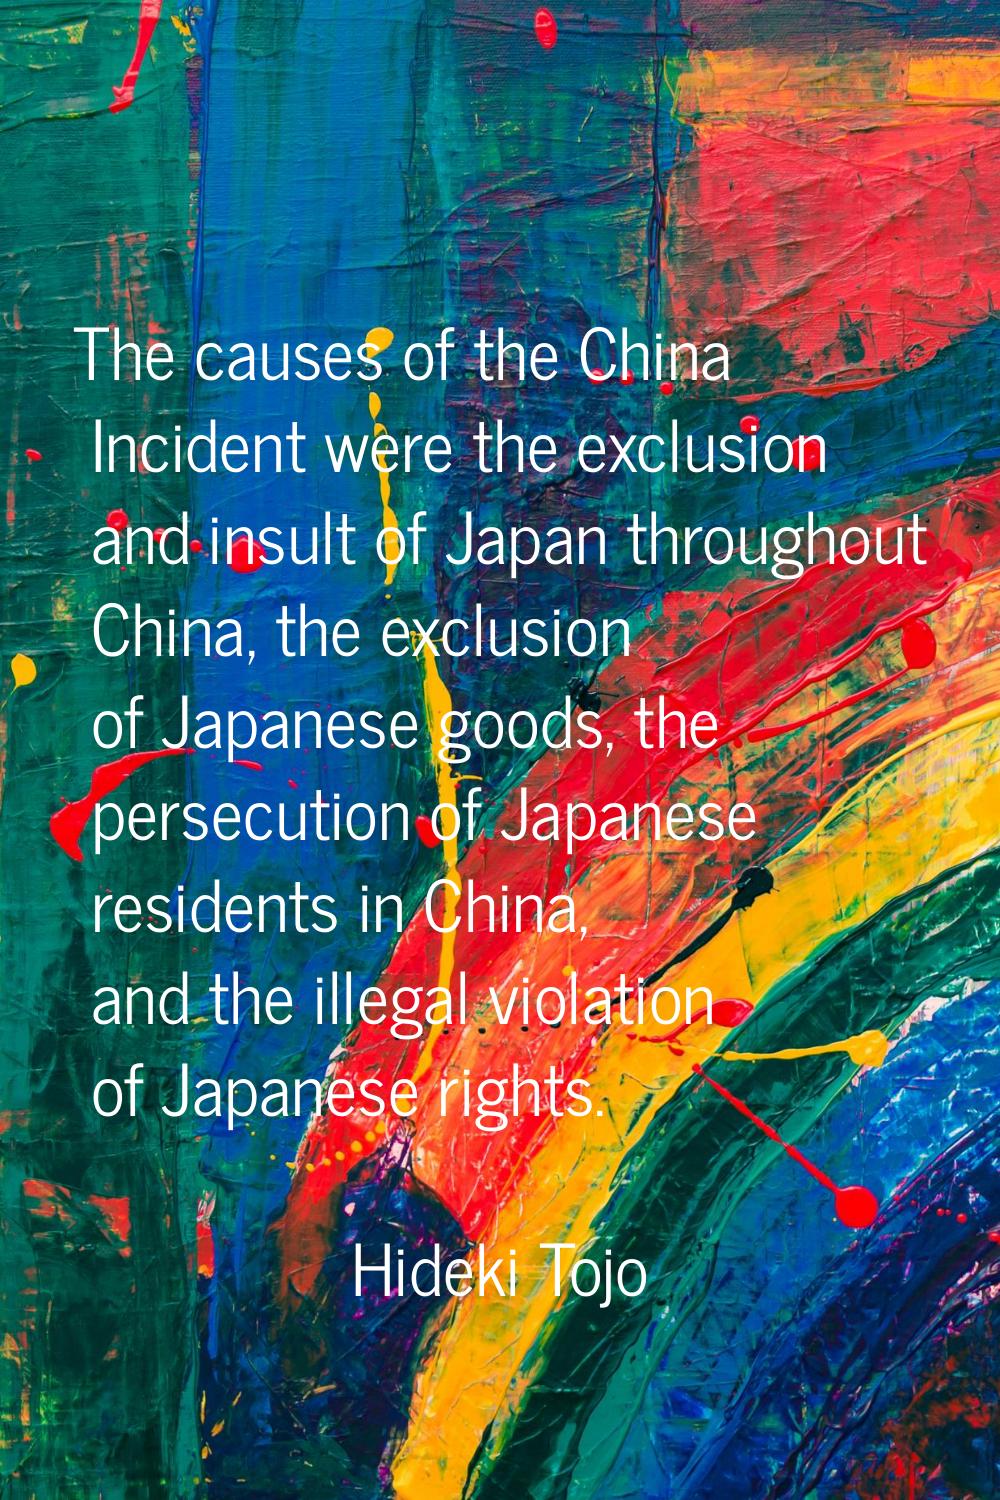 The causes of the China Incident were the exclusion and insult of Japan throughout China, the exclu